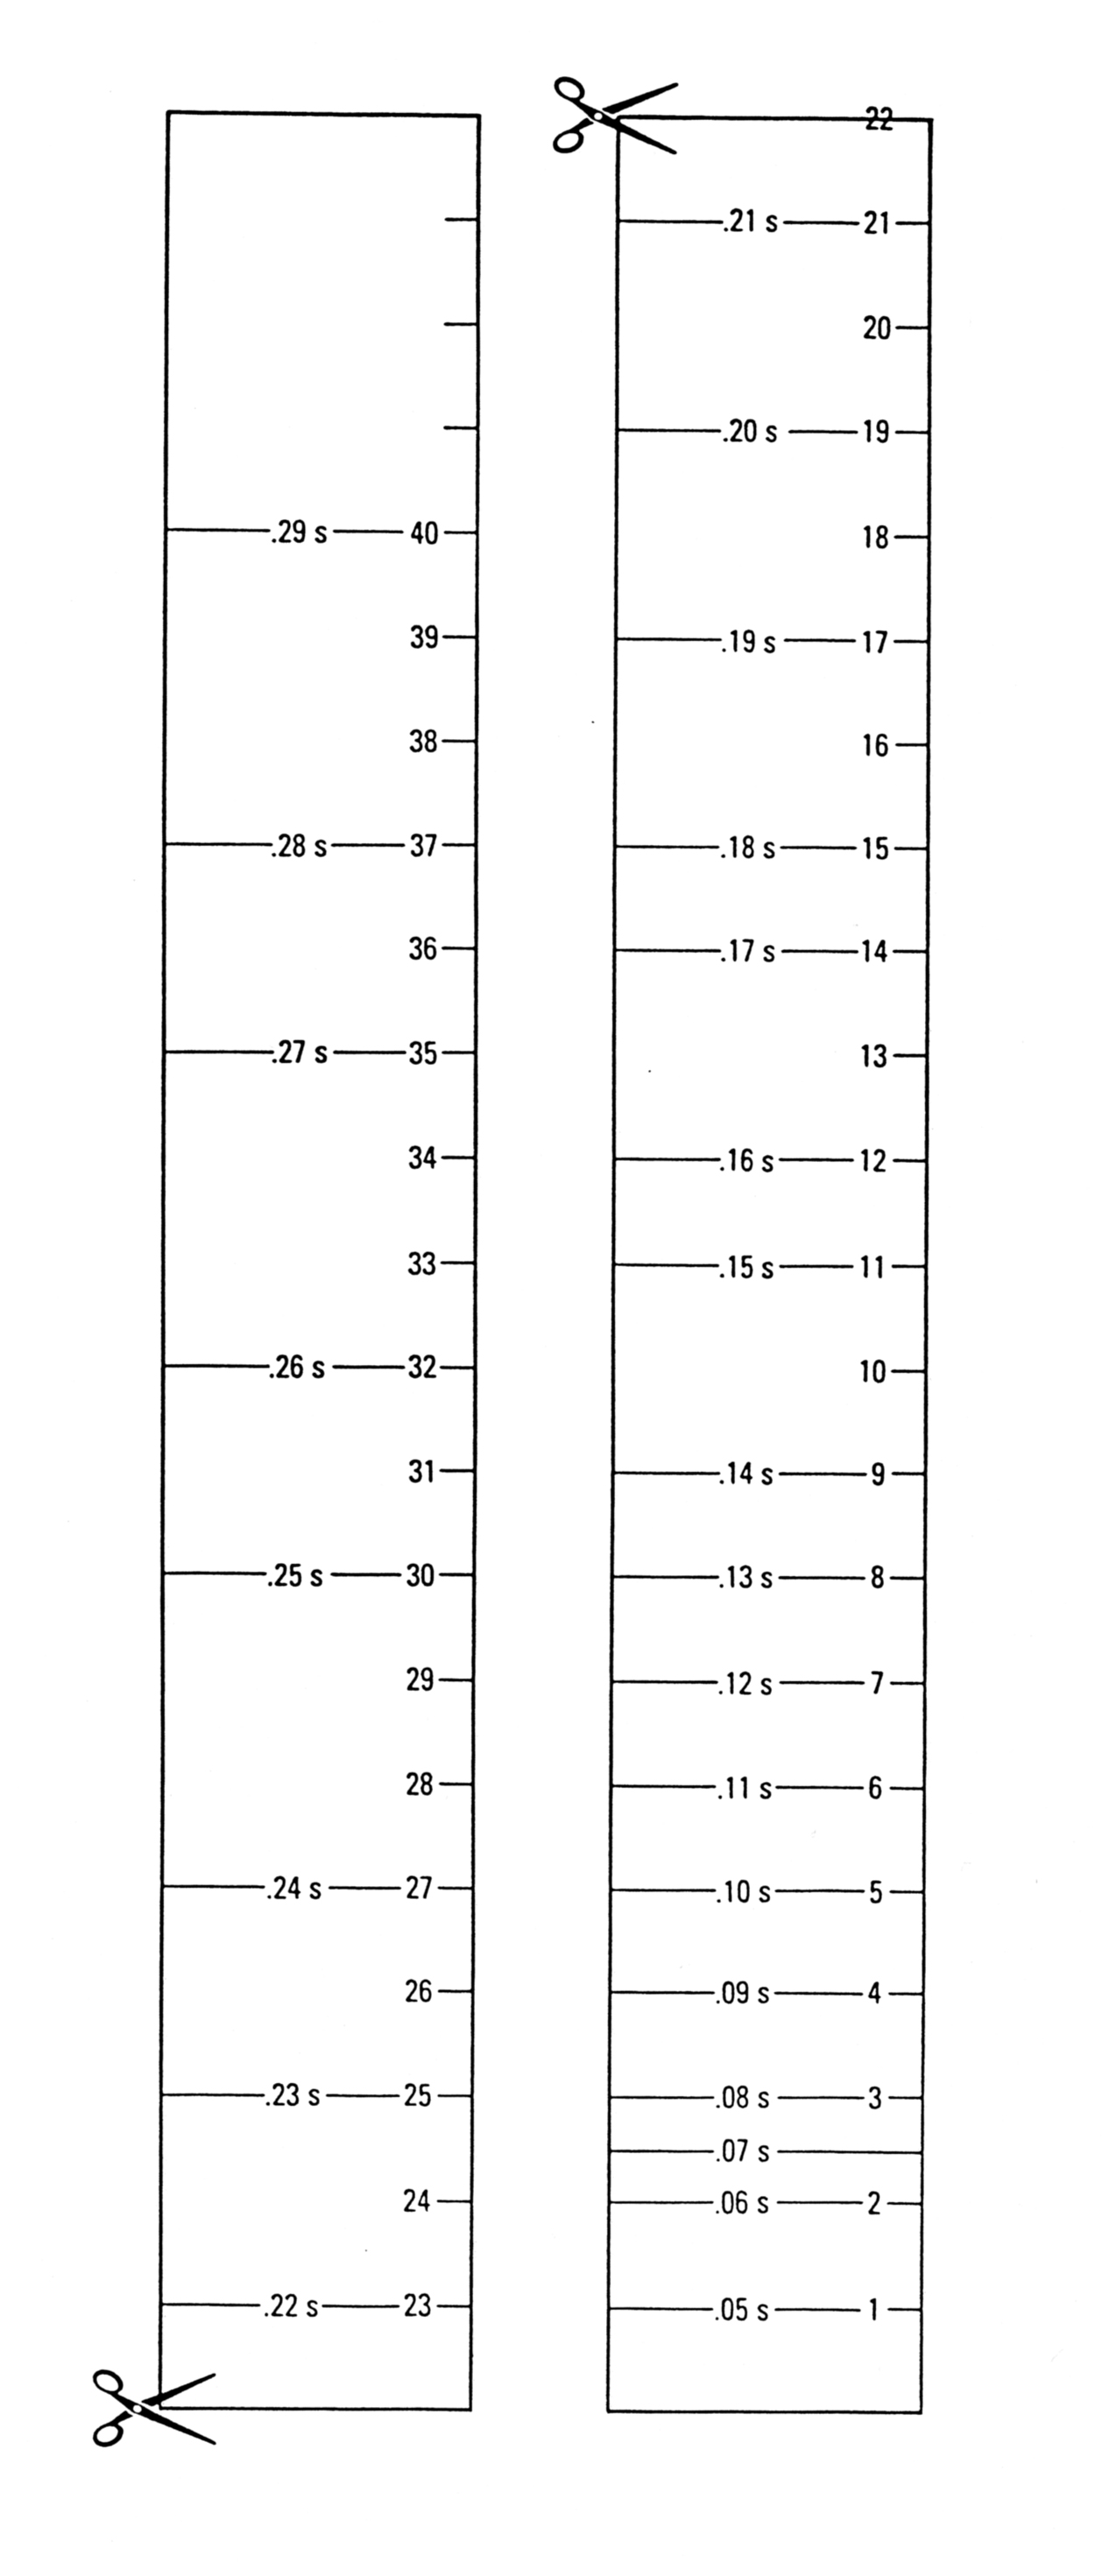 Reaction Time Ruler Template Image